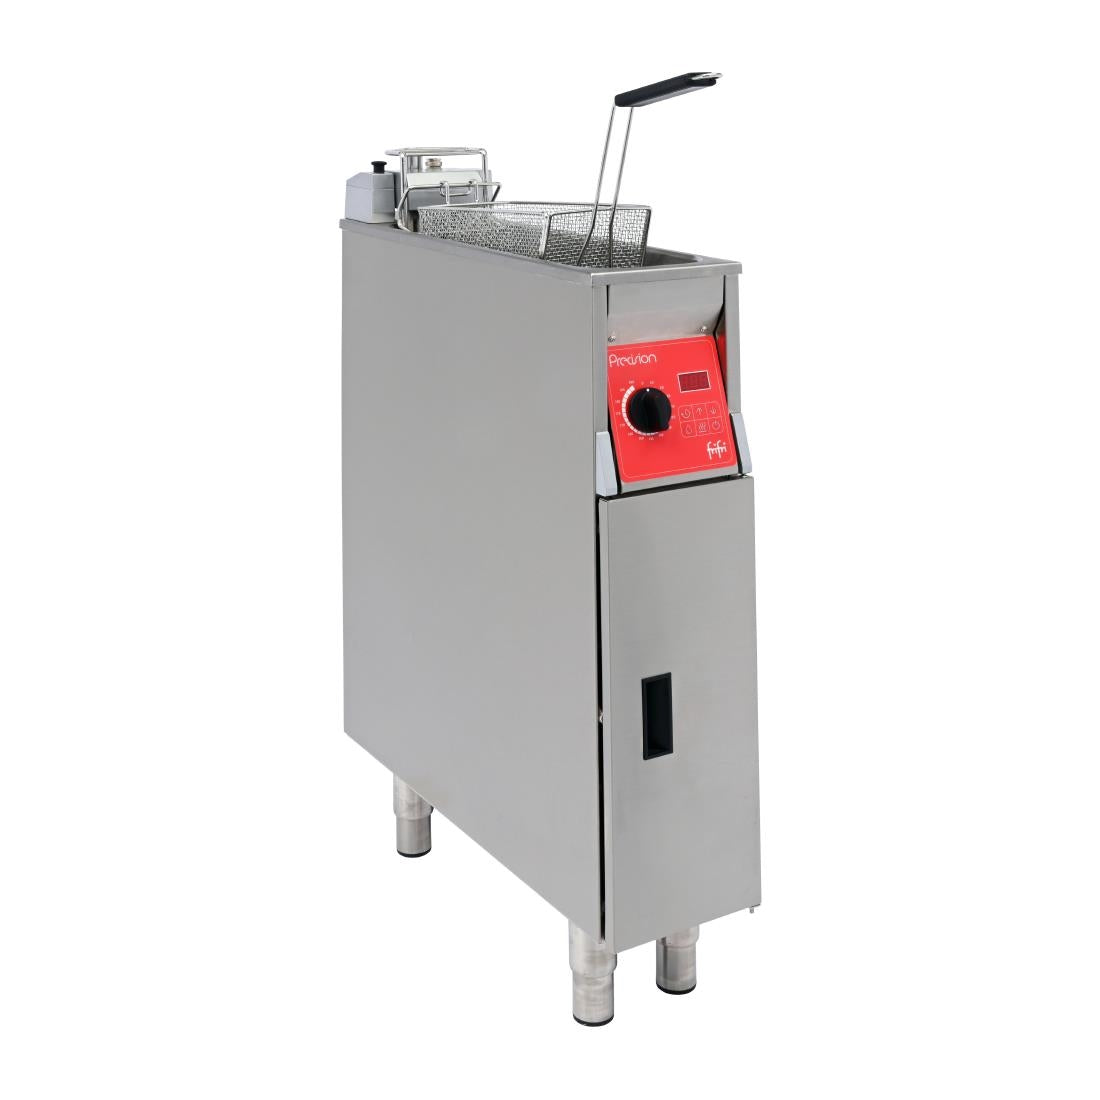 CX900 FriFri Precision 211 Electric Free Standing Single Tank Filtration Fryer PL211M31G0 JD Catering Equipment Solutions Ltd